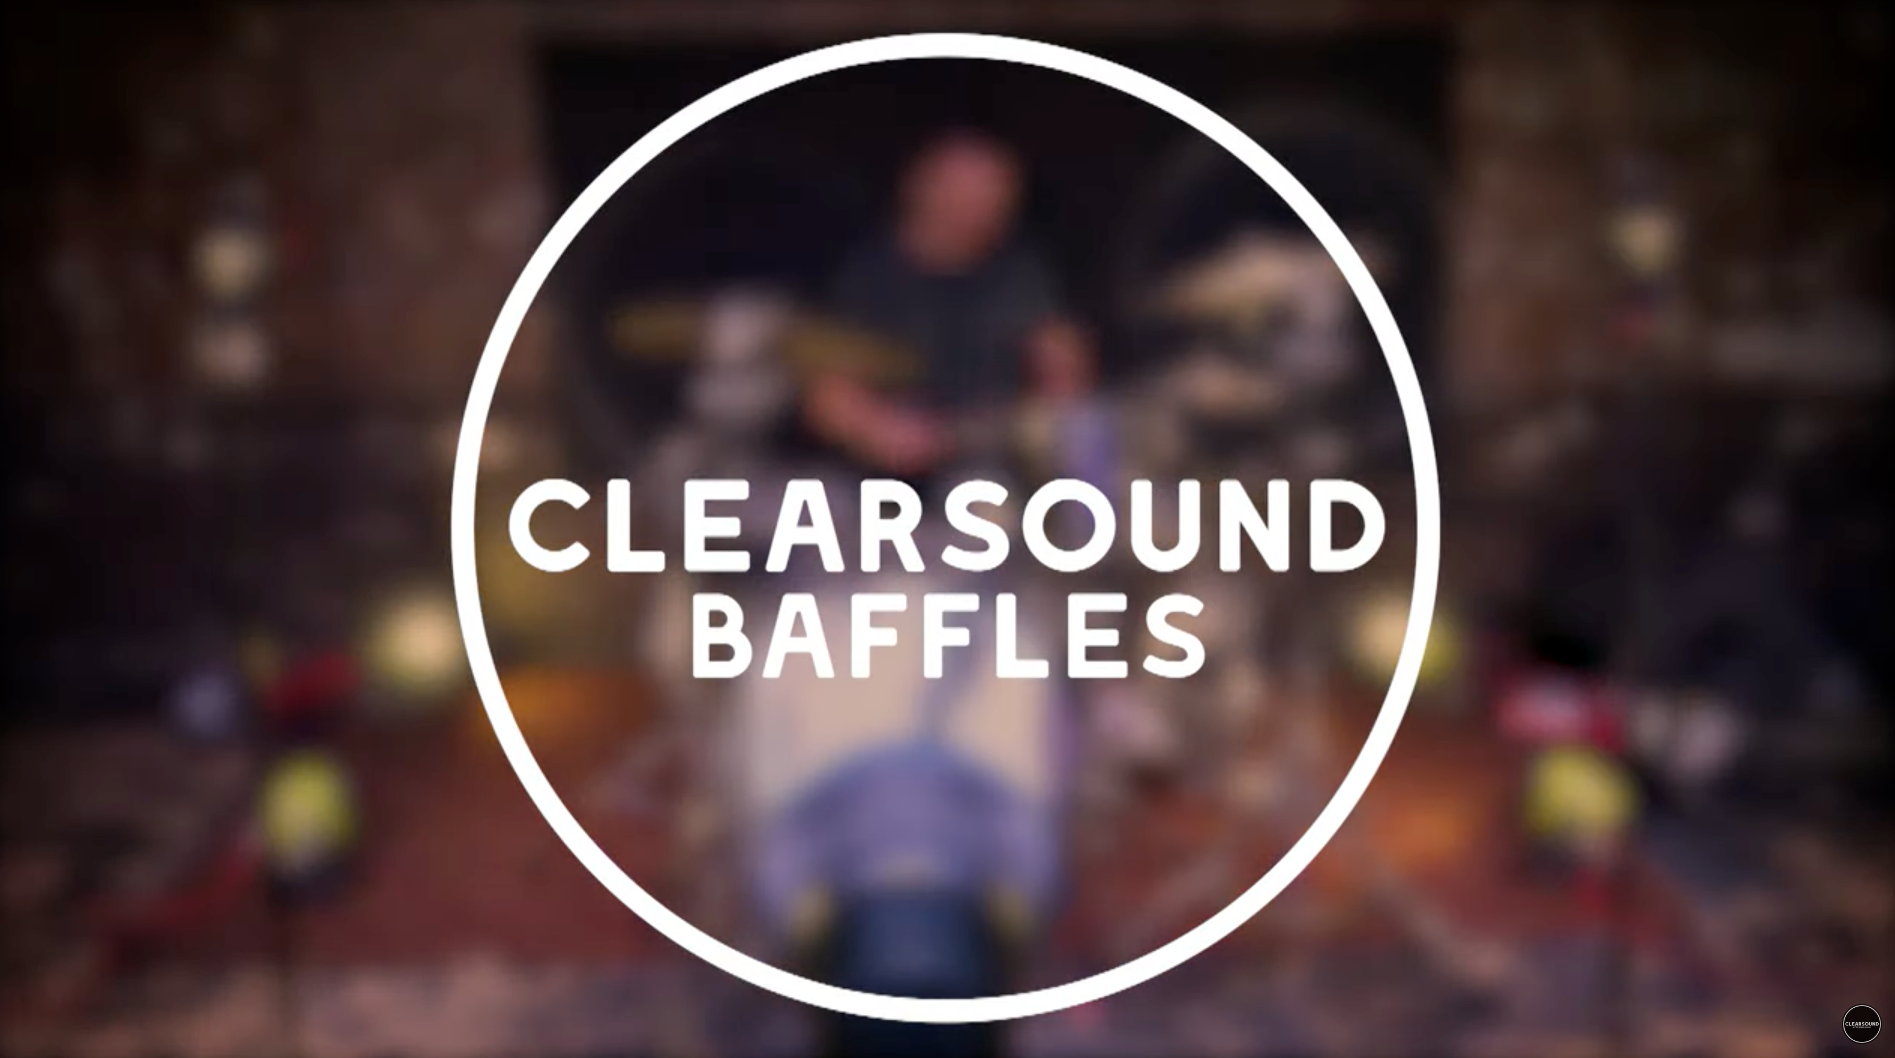 Load video: Demo test of Clearsound Baffles